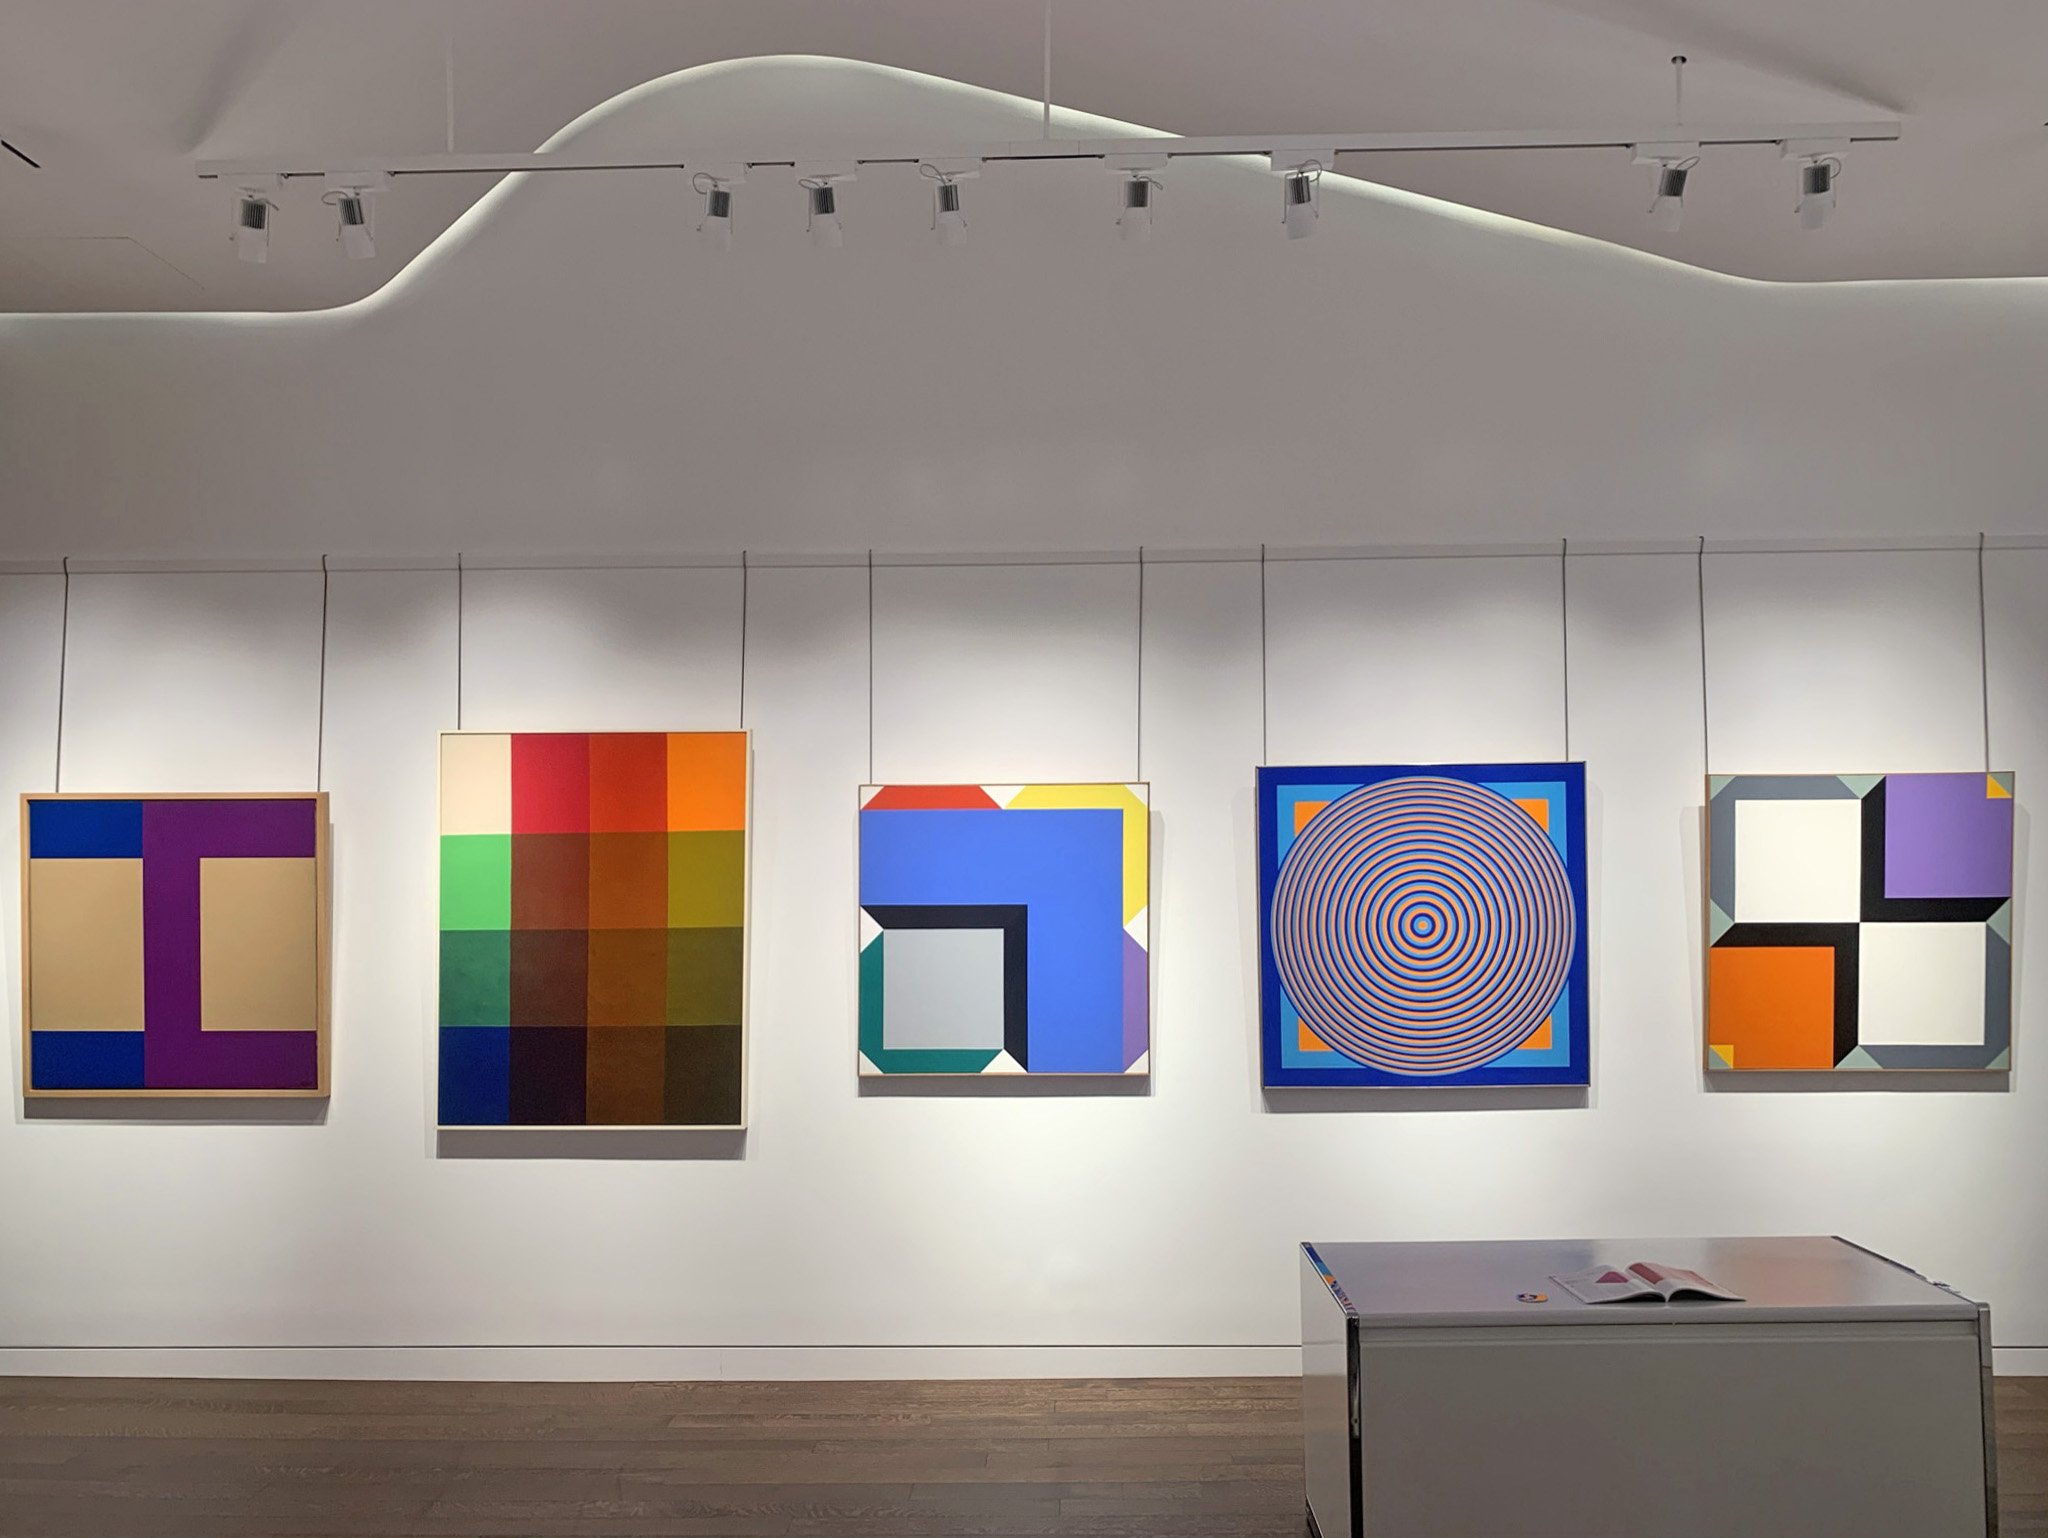  HOMAGE TO THE SQUARE: ALBERS' INFLUENCE ON GEOMETRIC ABSTRACTION Feb 18 - May 7, 2021 